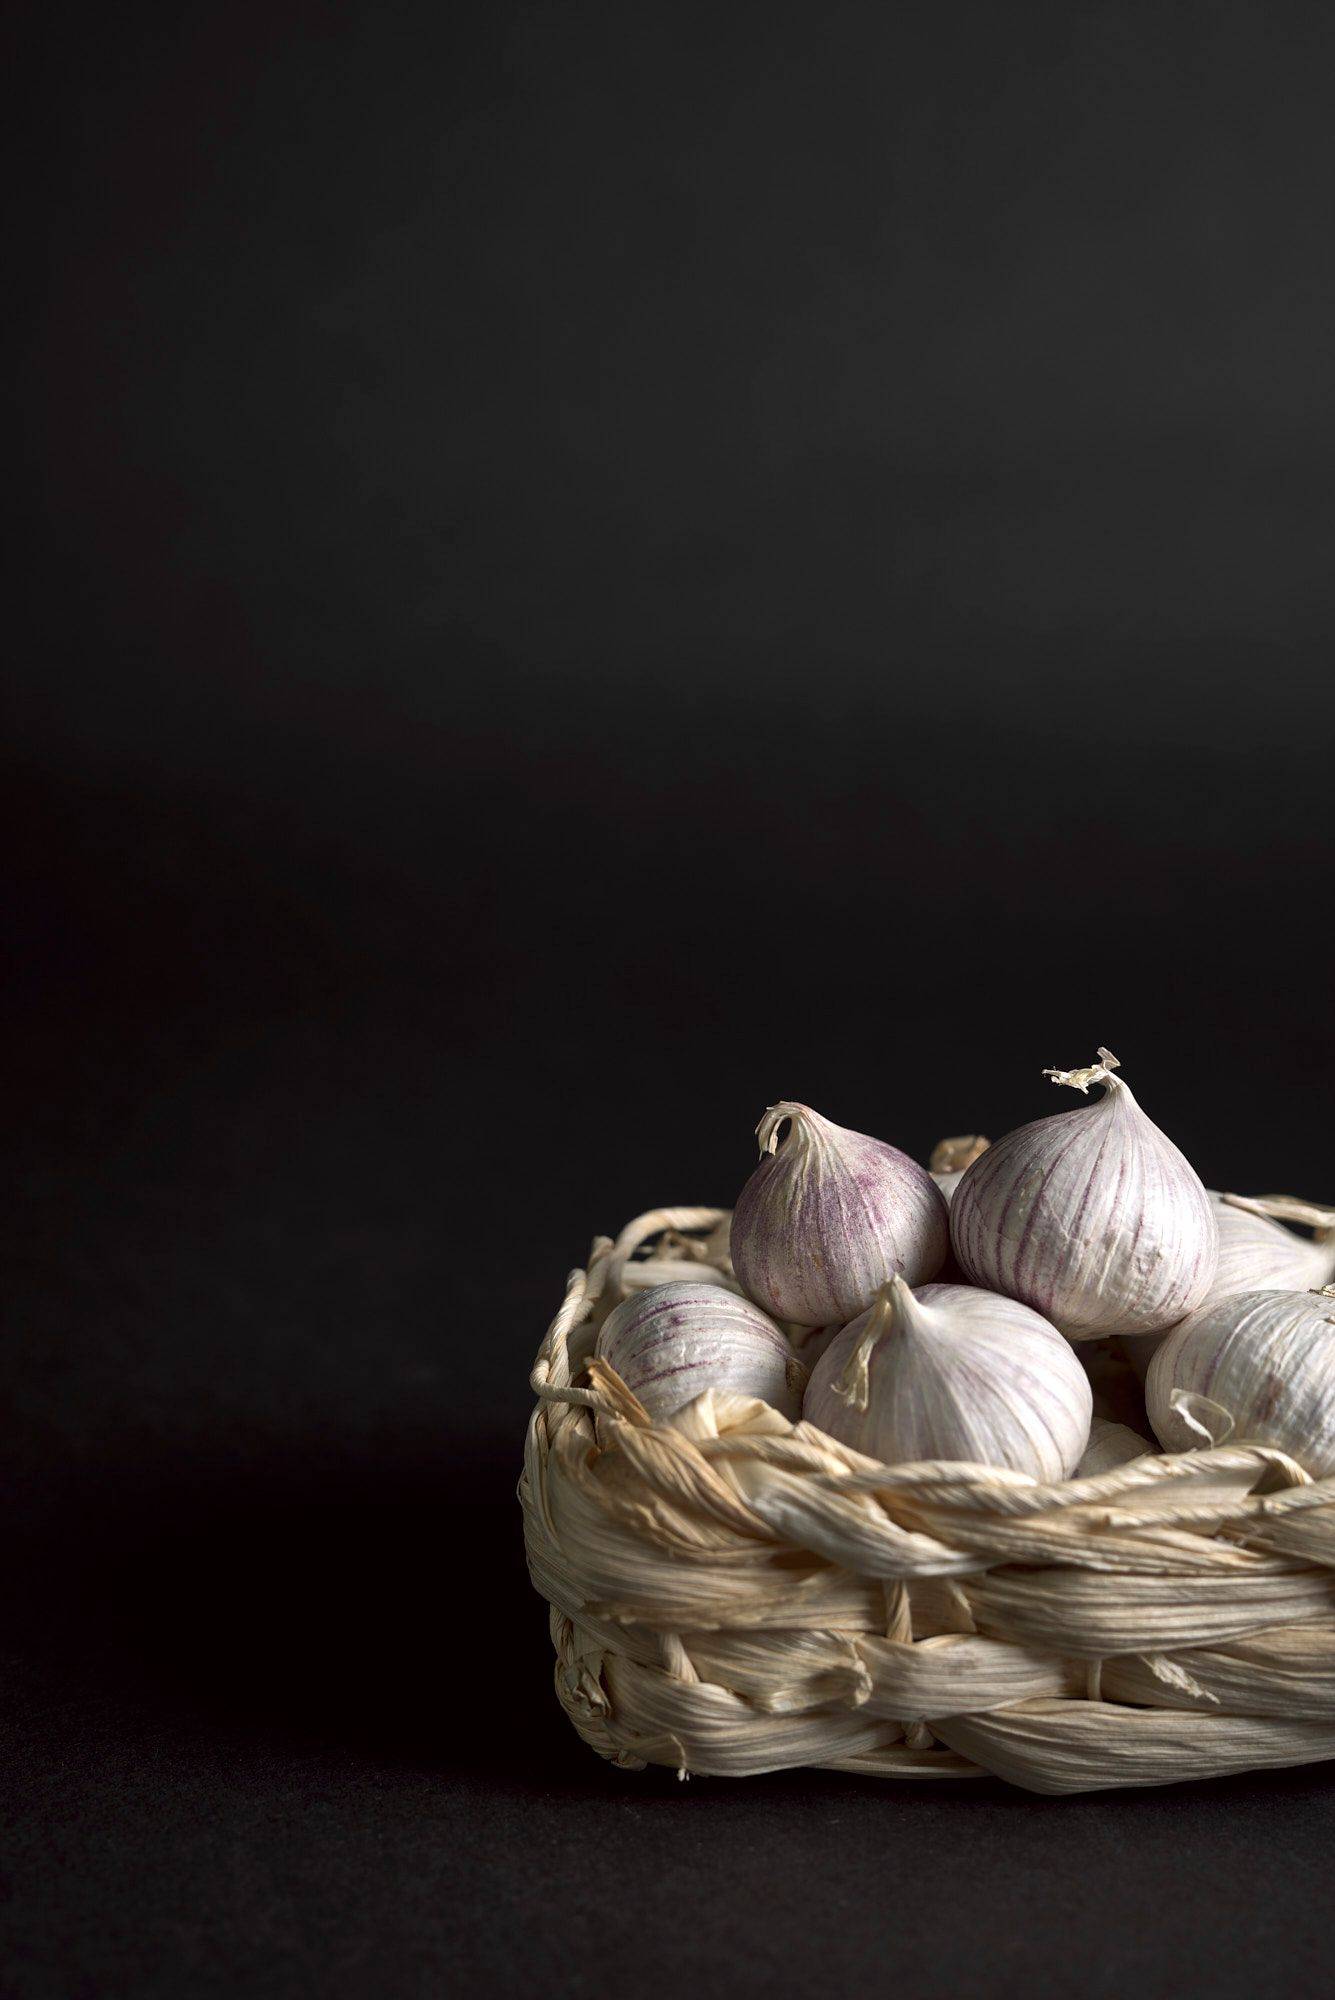 garlic cloves in a small basket with black background